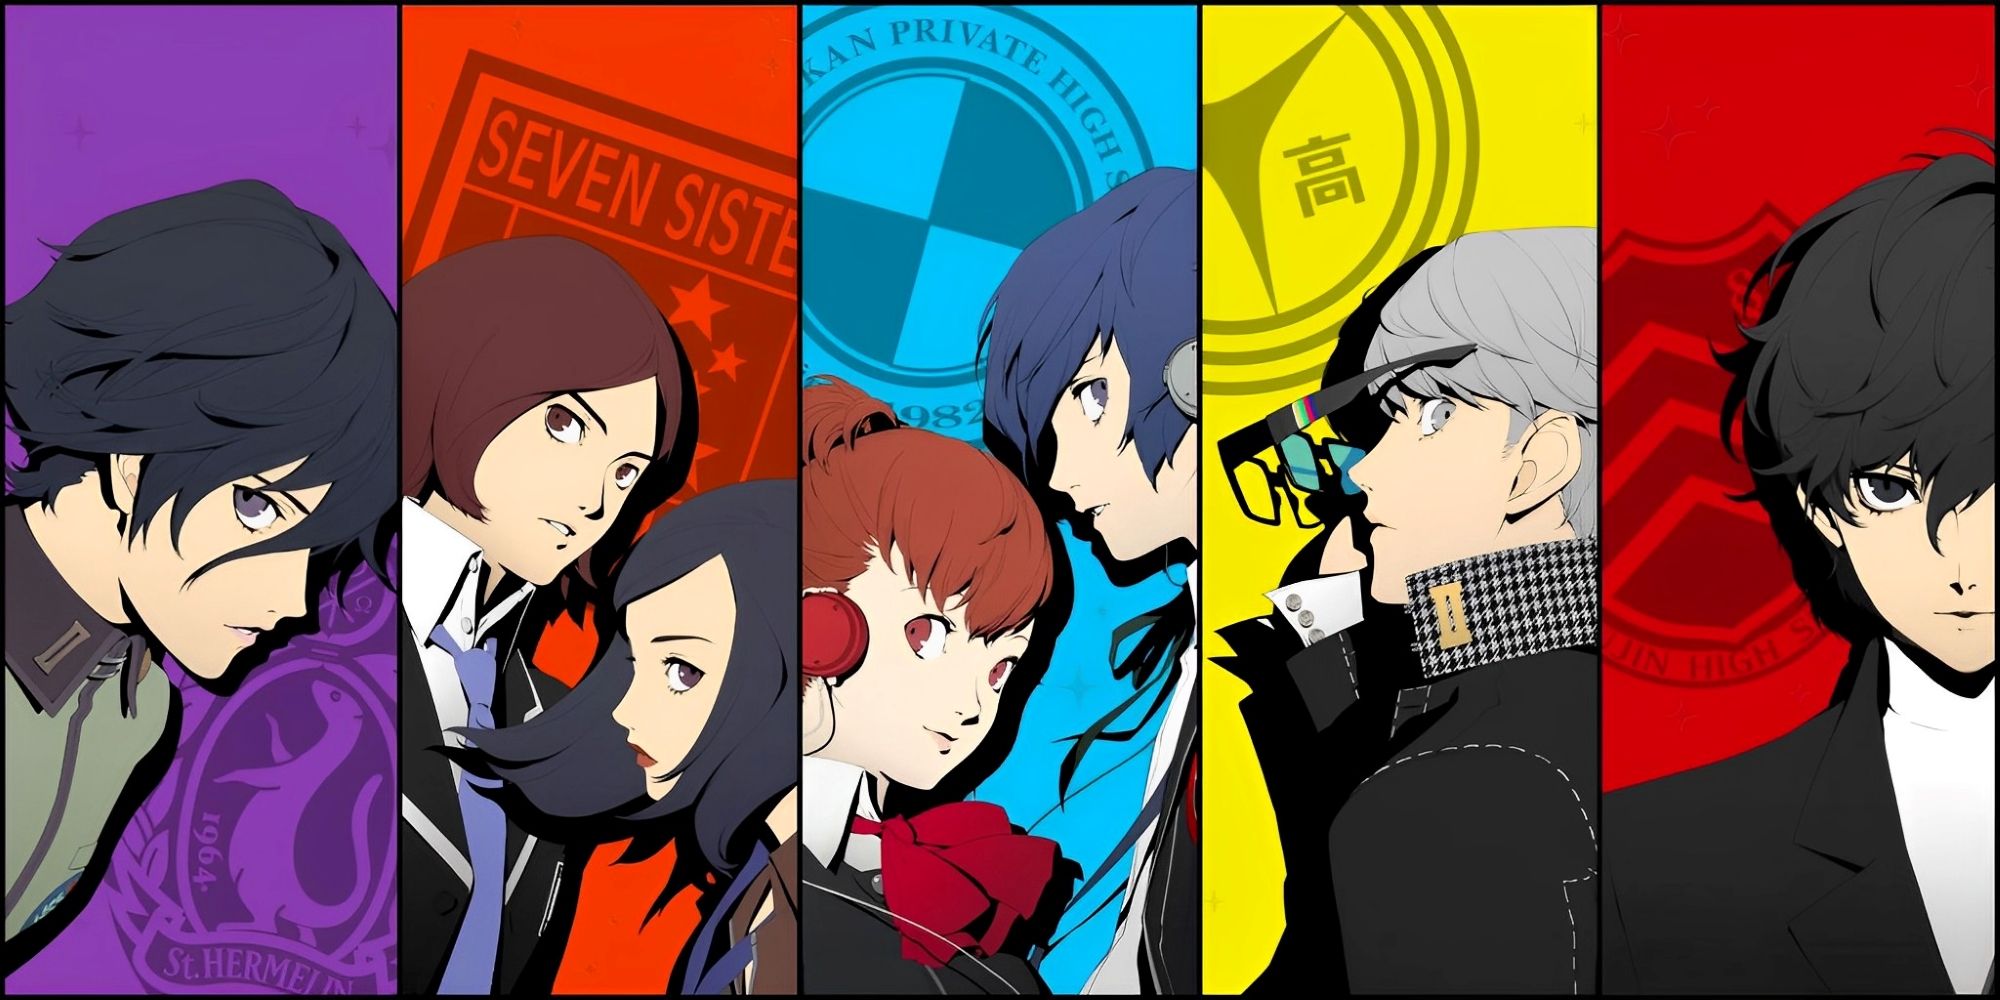 Protagonists from the Persona games